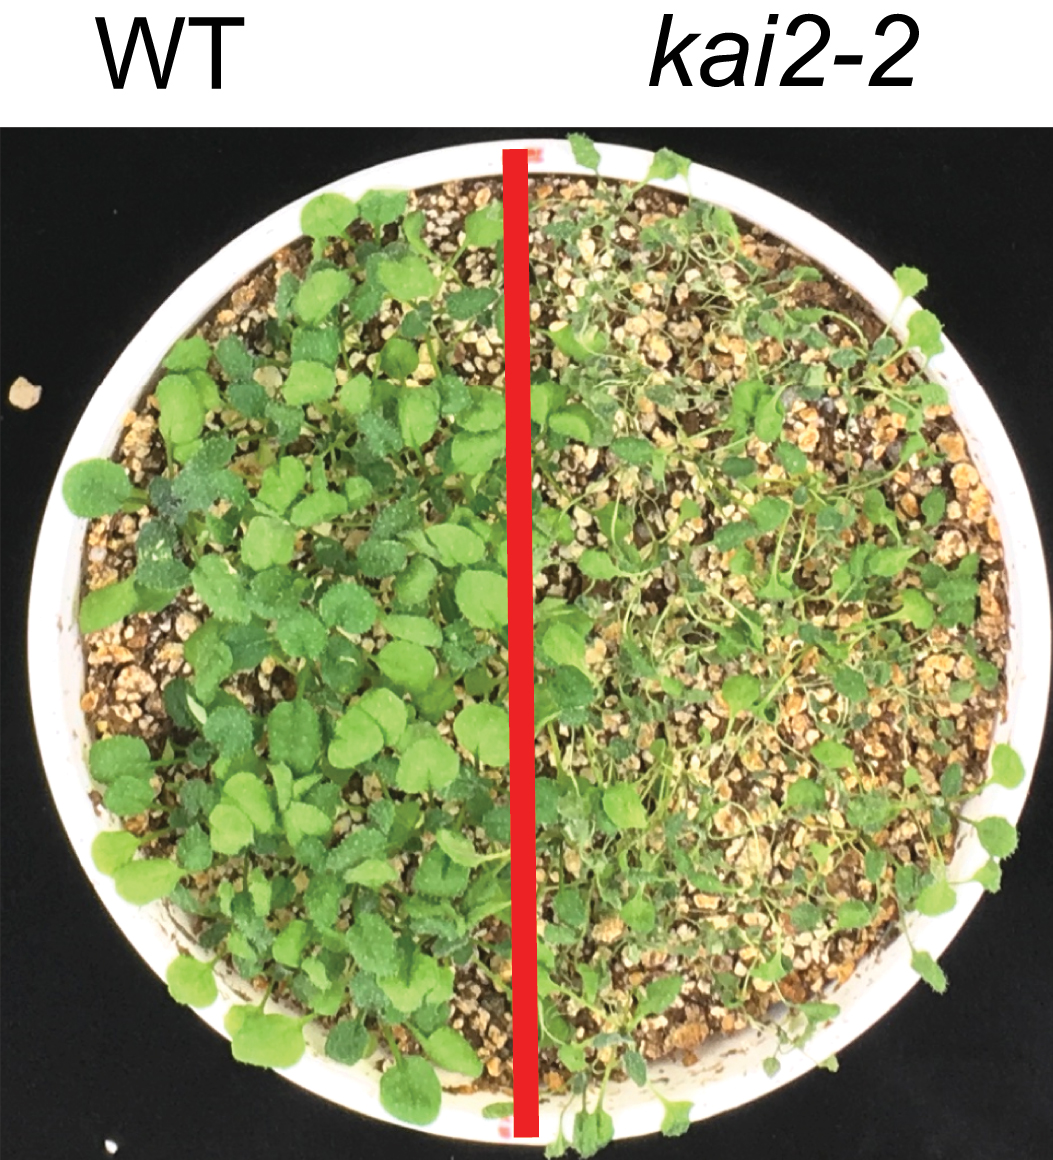 Photo showing wildtype and kai2 mutant plants grown in the same pot for 14 days without water.